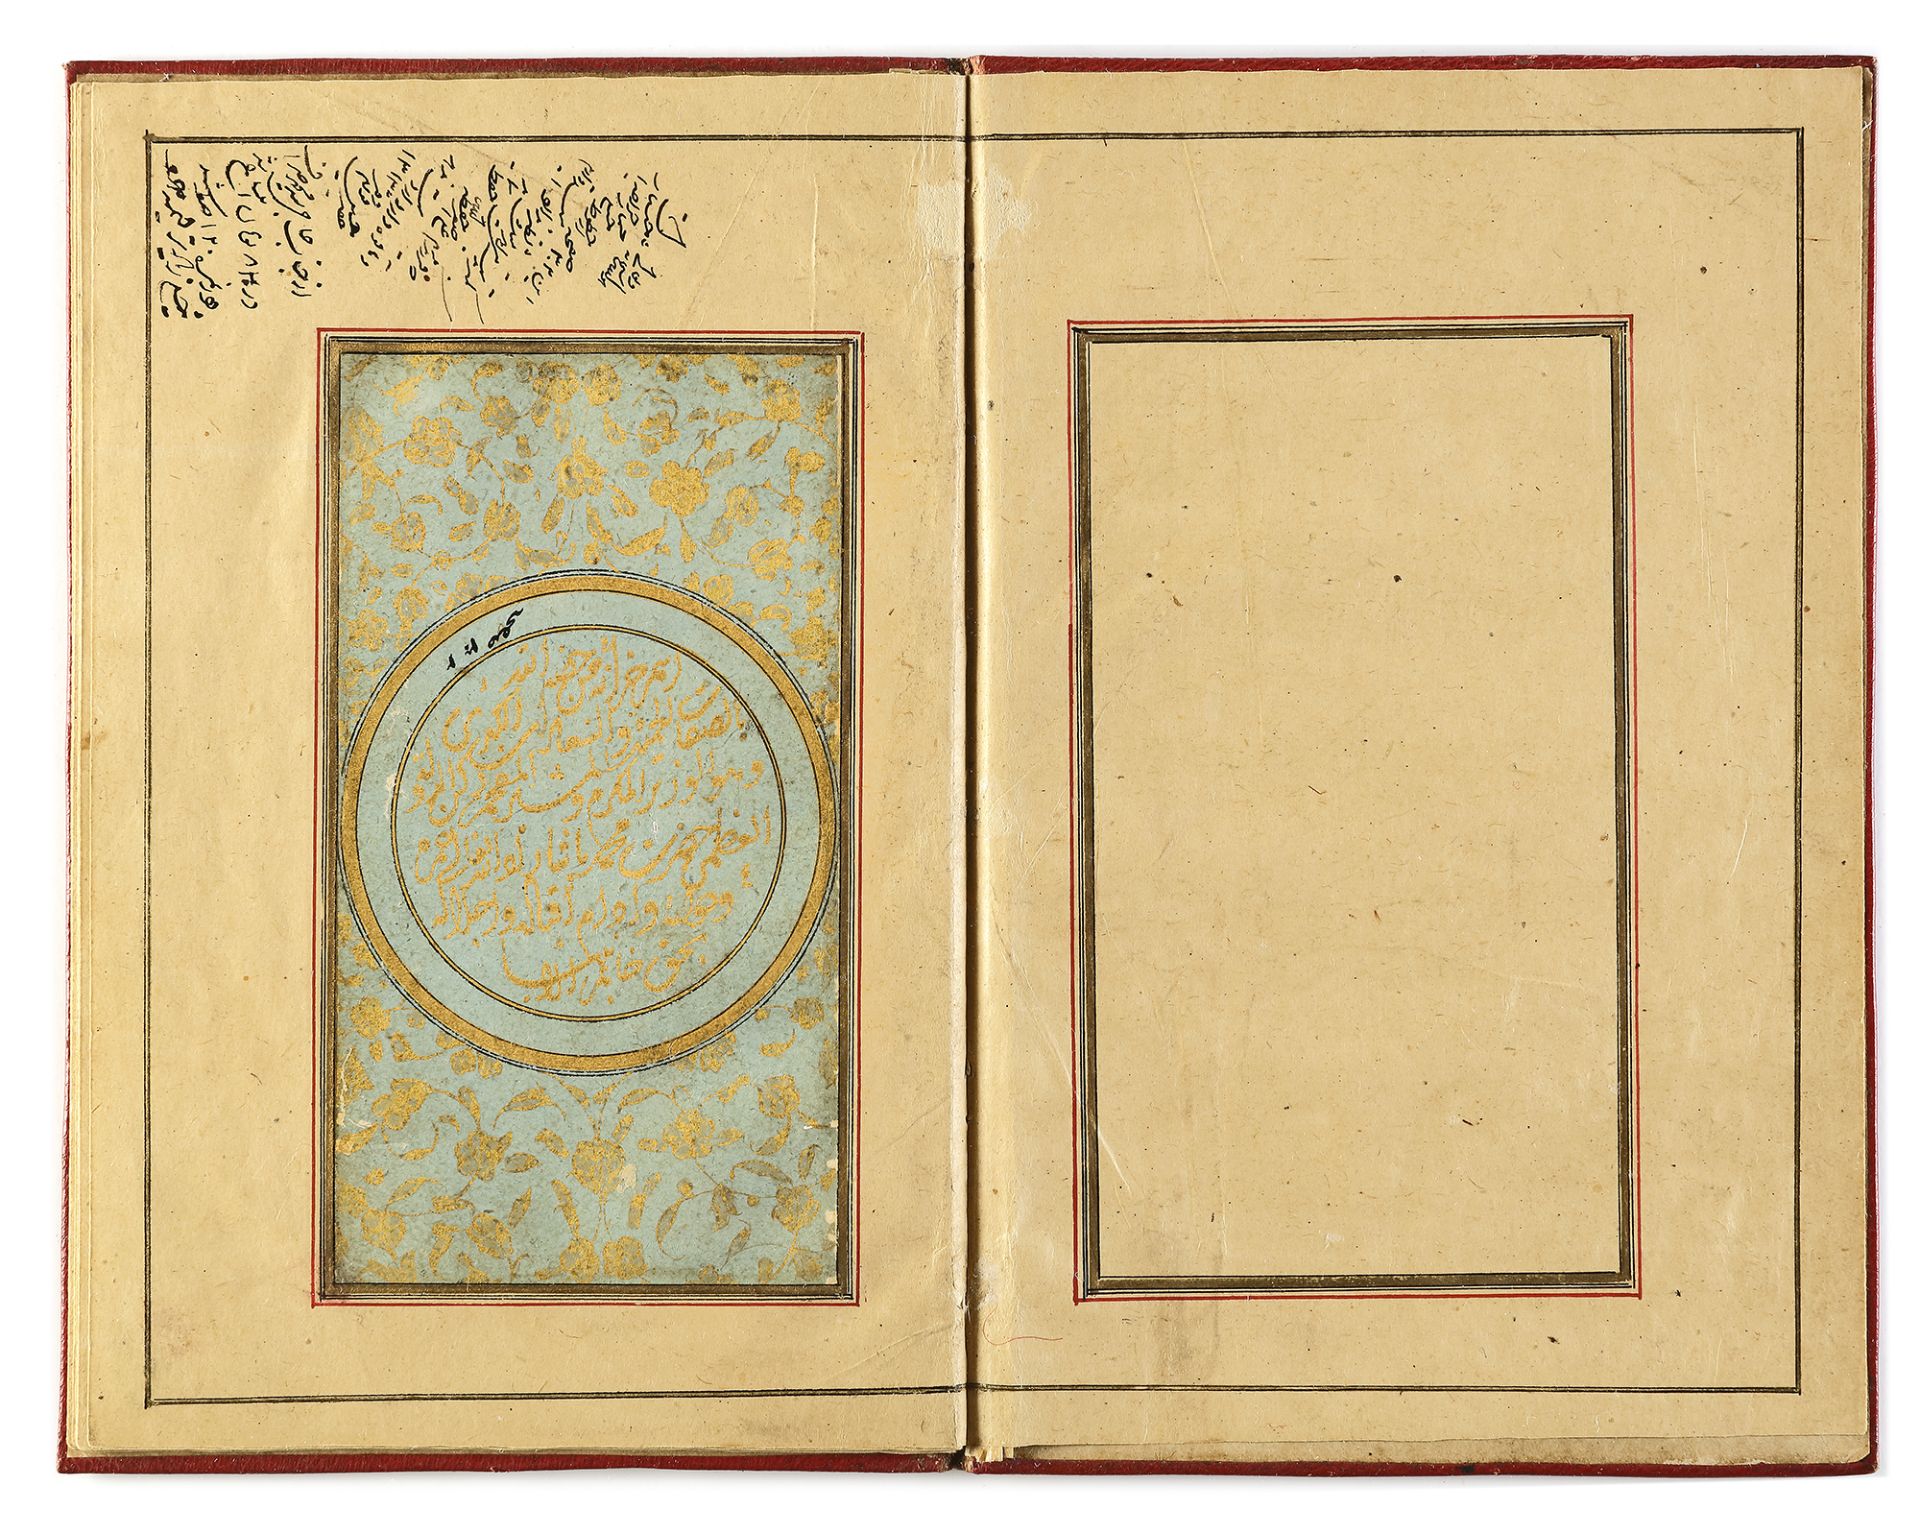 A MANUSCRIPT OF POETRY, SIGNED BY IKHTIYAR AL-MUNSHI, PERSIA, SAVAFID, DATED 975 AH/1567-68 AD - Image 2 of 18